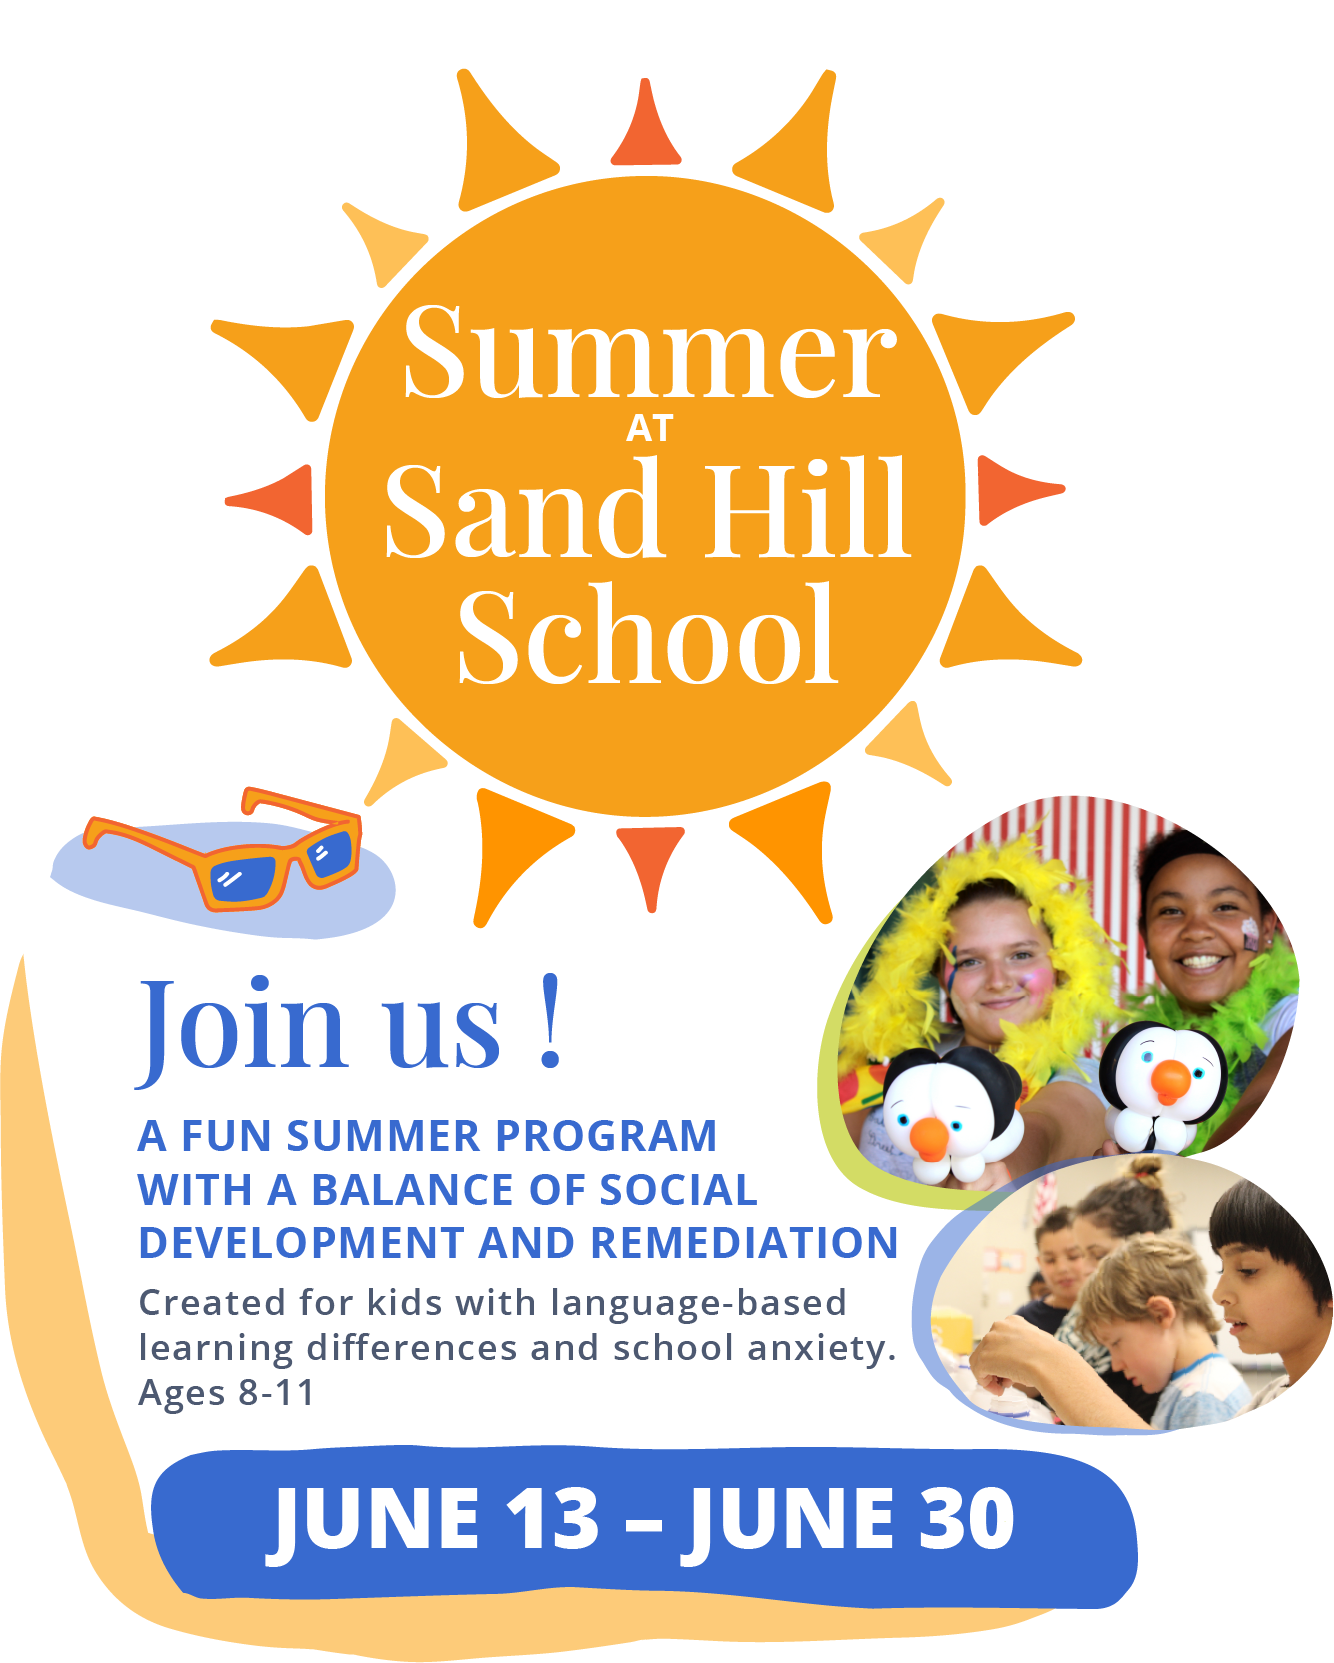 Summer at Sand Hill School. June 13 - June 30. Join us! A fun summer program with a balance of social development and remediation. Created for kids with language-based learning differences and school anxiety. Ages 8-11